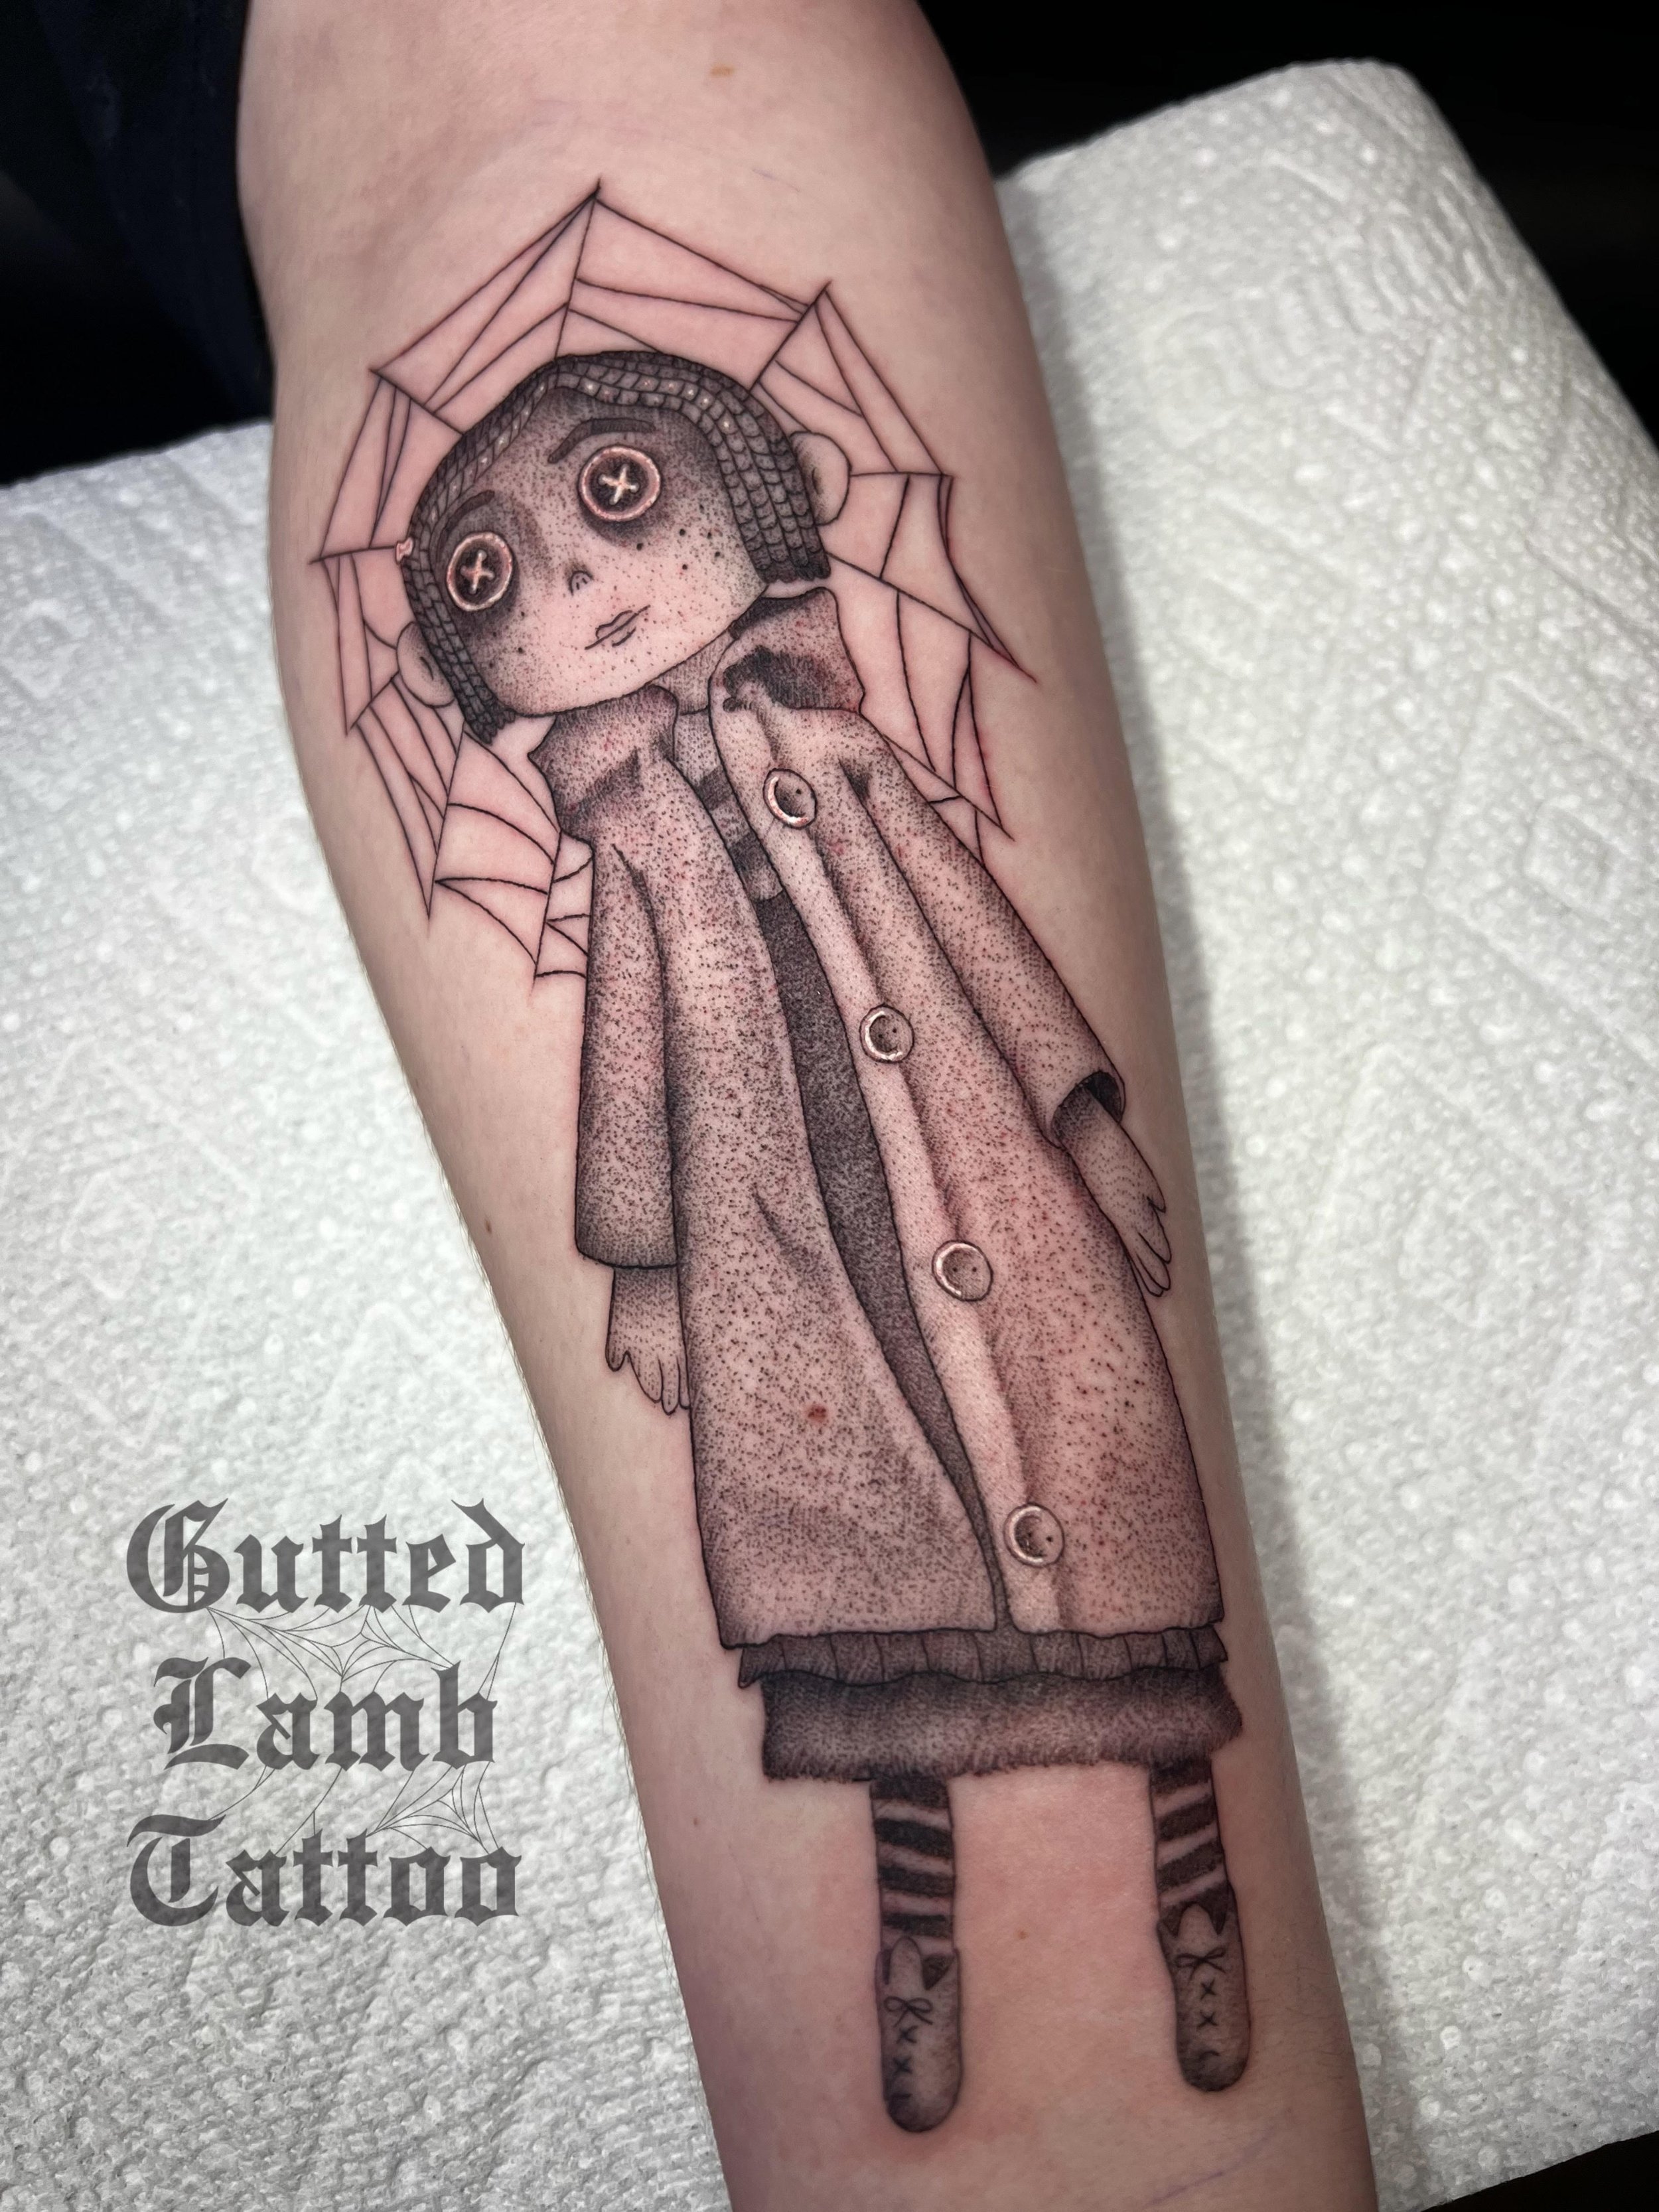 10 Best Coraline Tattoo Ideas Youll Have To See To Believe   Daily Hind  News